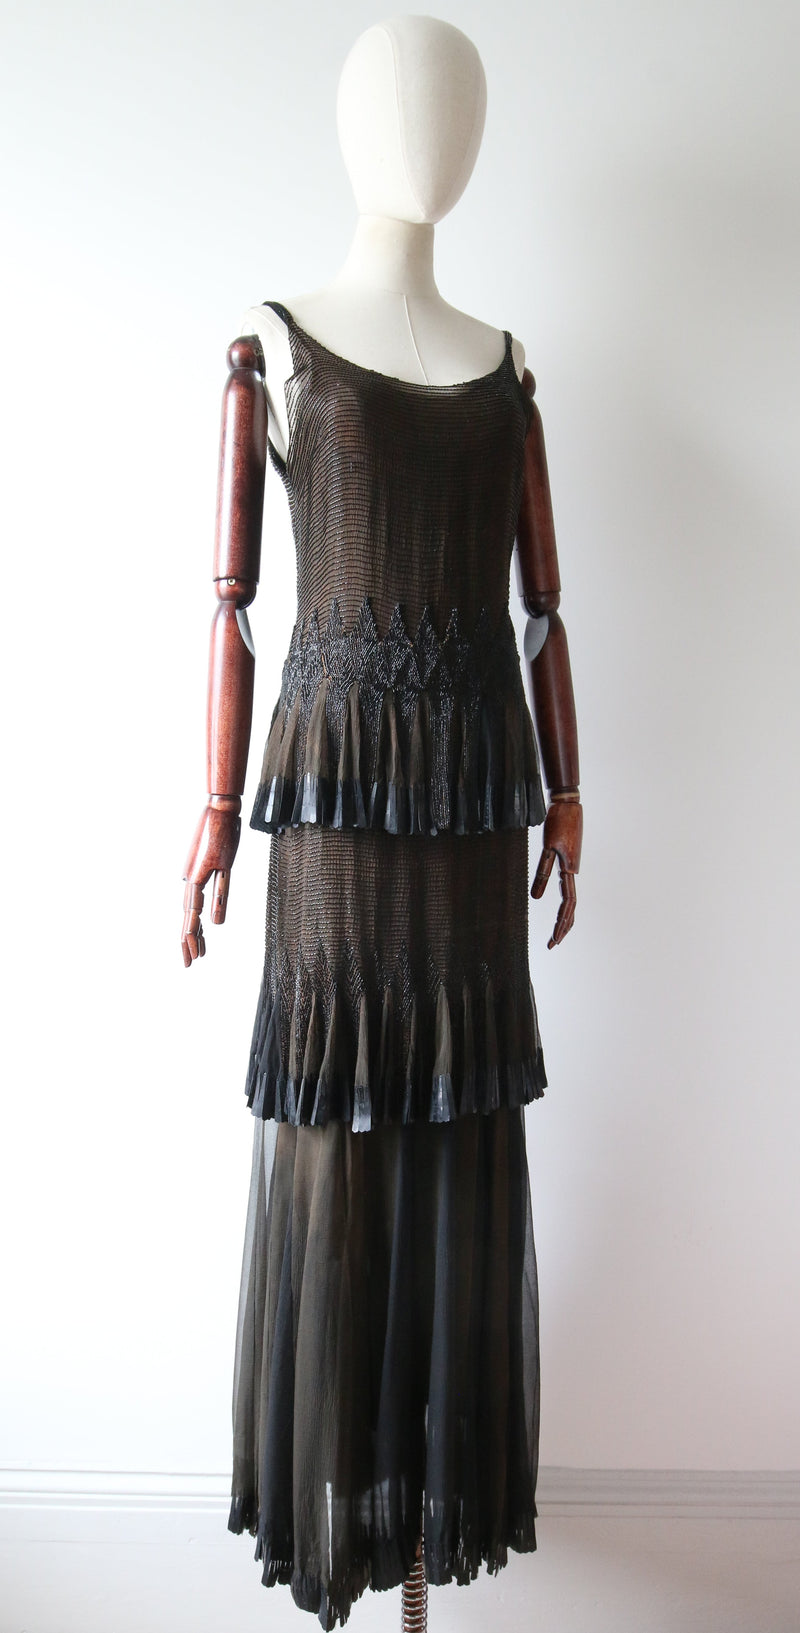 “Liliane de Monte Carlo" Vintage 1930's Couture Silk Chiffon Beaded Tiered Evening Gown UK 6-8 US 2-4